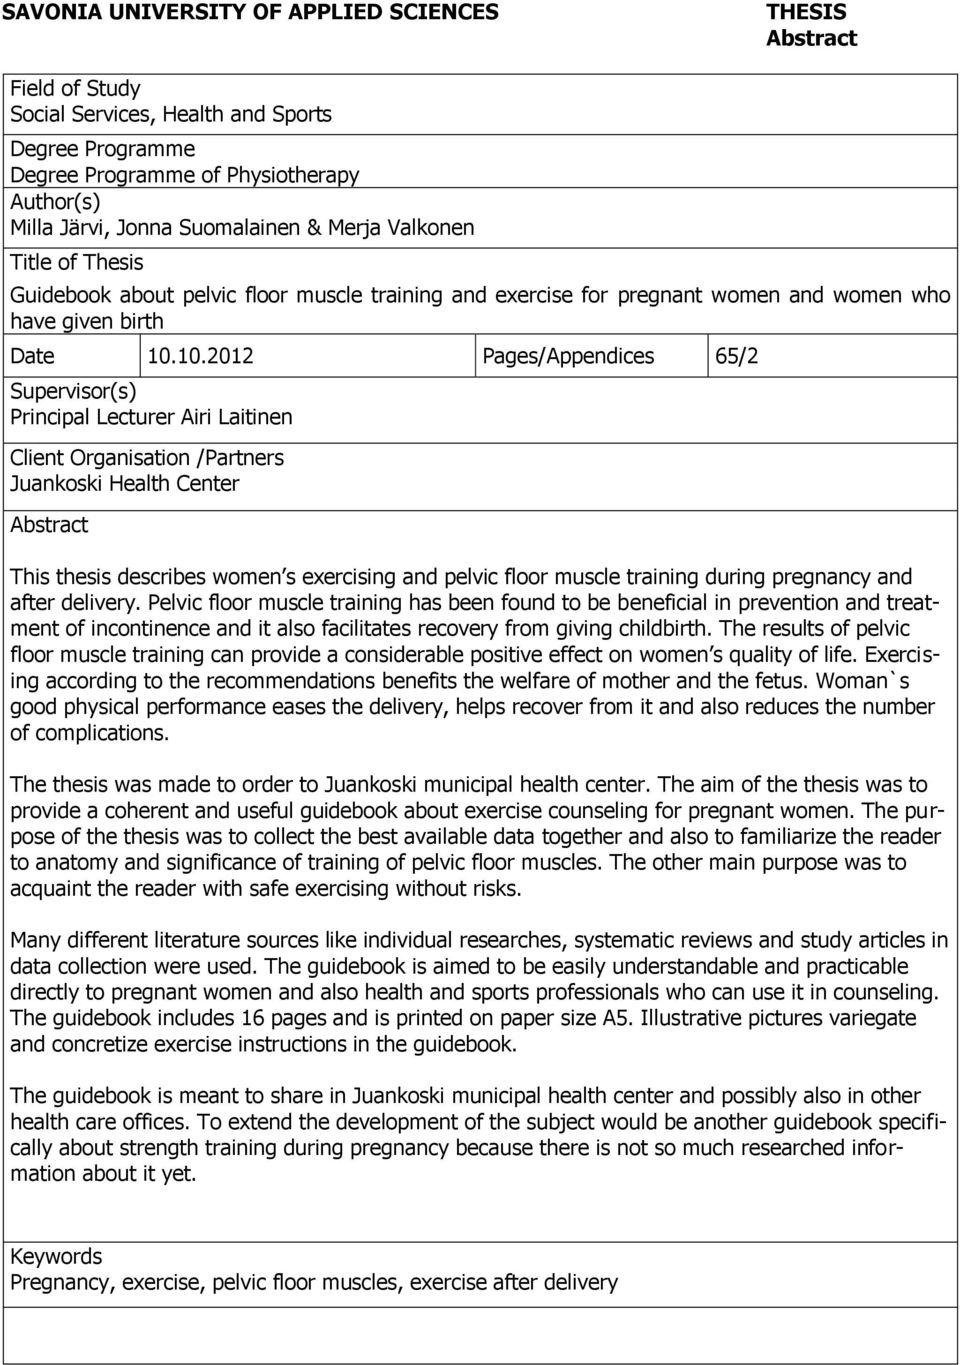 10.2012 Pages/Appendices 65/2 Supervisor(s) Principal Lecturer Airi Laitinen Client Organisation /Partners Juankoski Health Center Abstract This thesis describes women s exercising and pelvic floor